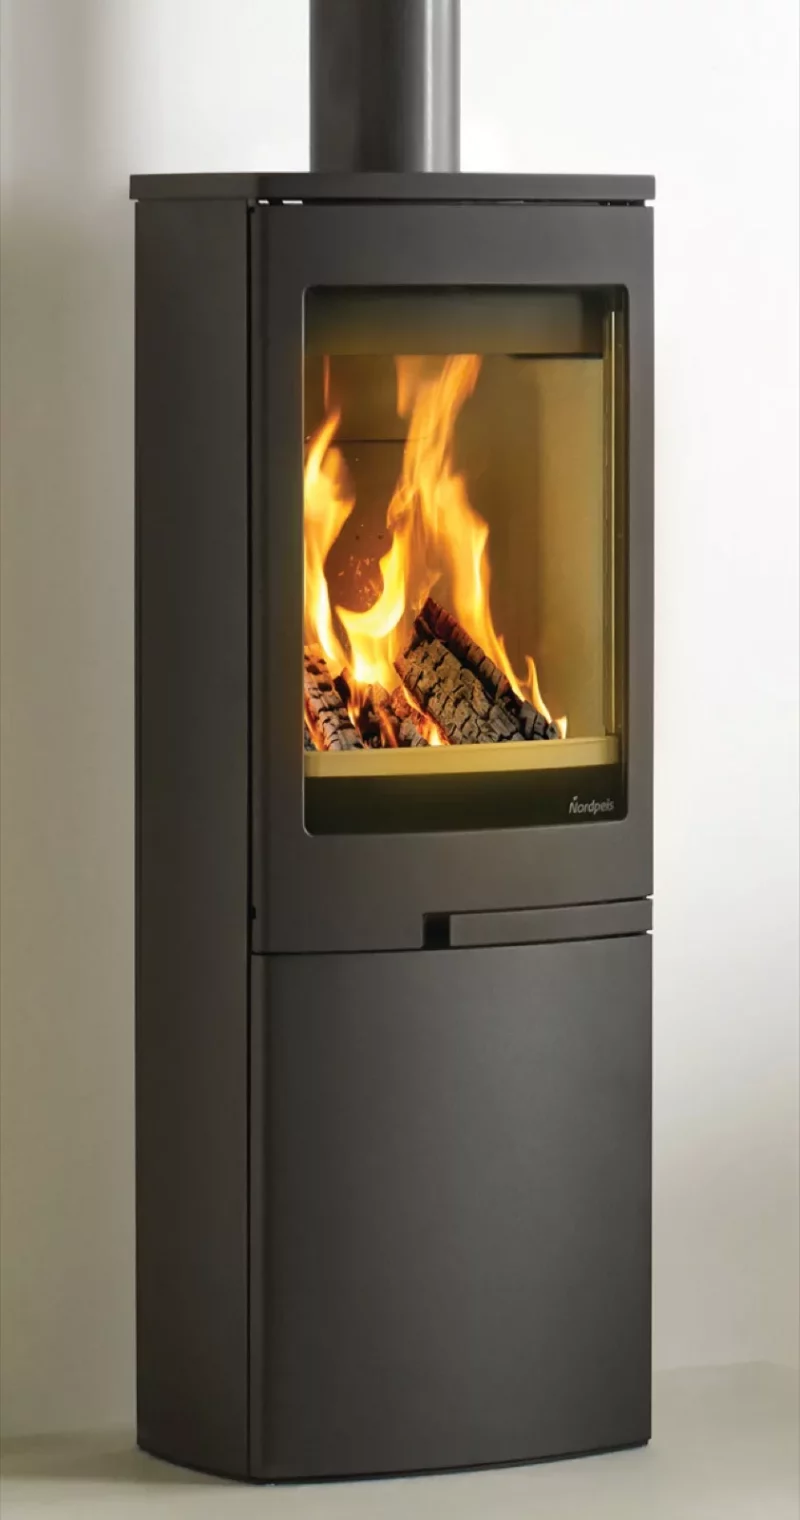 Nordpeis Duo 5 Steel Sided Wood Stove